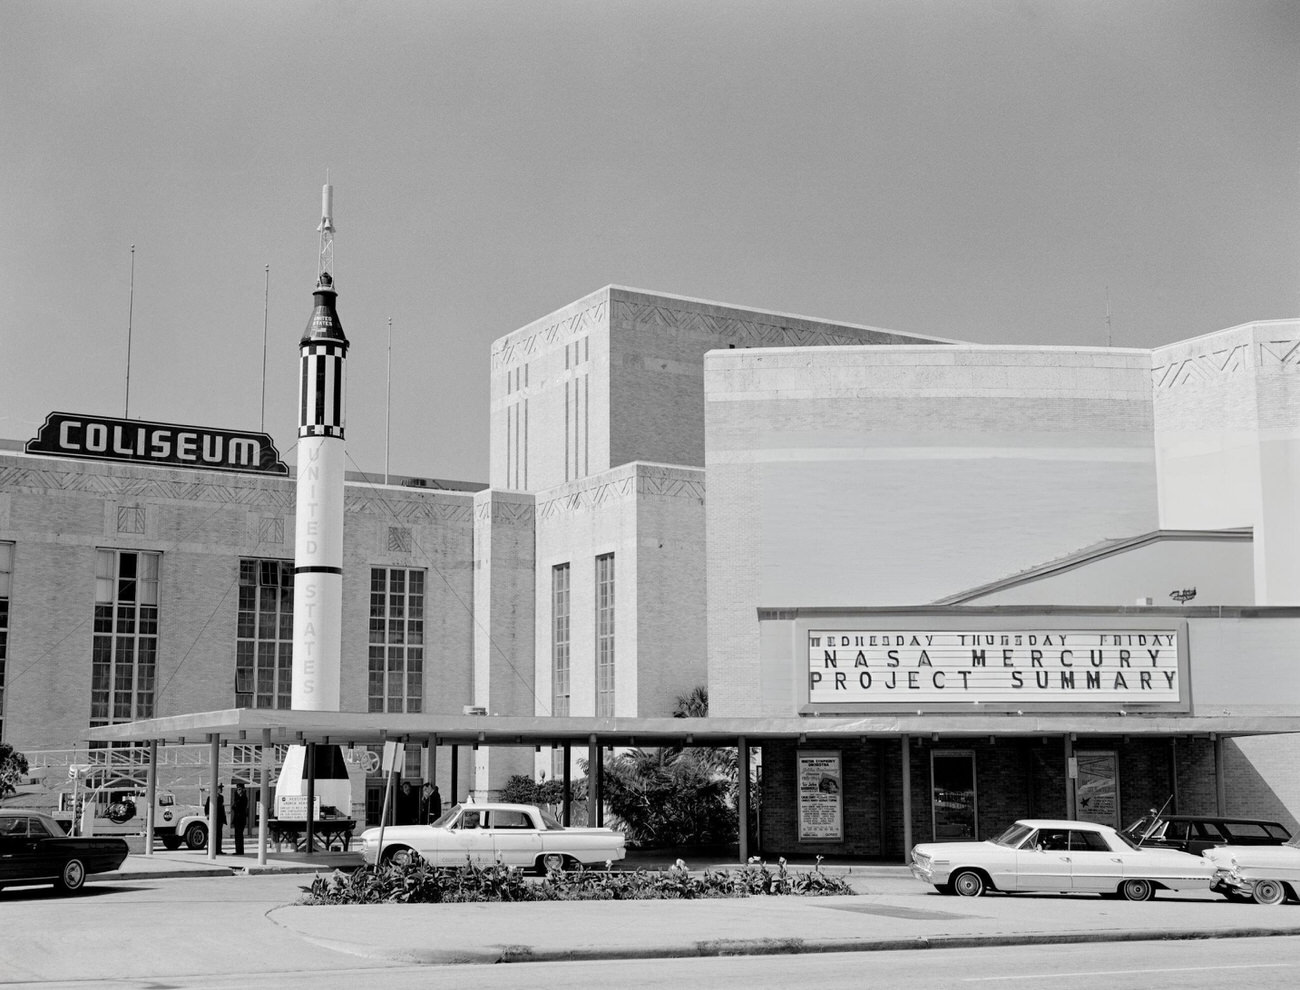 The Project Mercury Summary Conference was held at the Houston Coliseum, Texas, 1963.